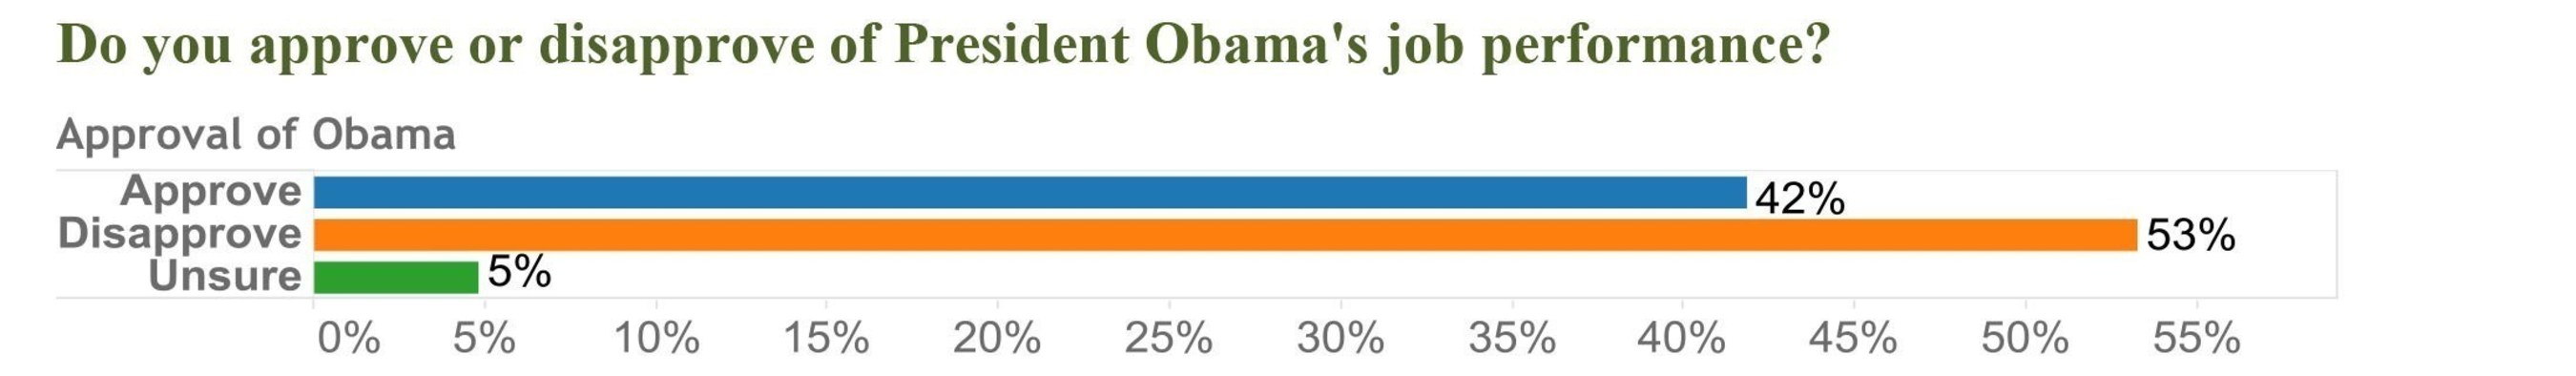 Do you approve or disapprove of President Obama's job performance?